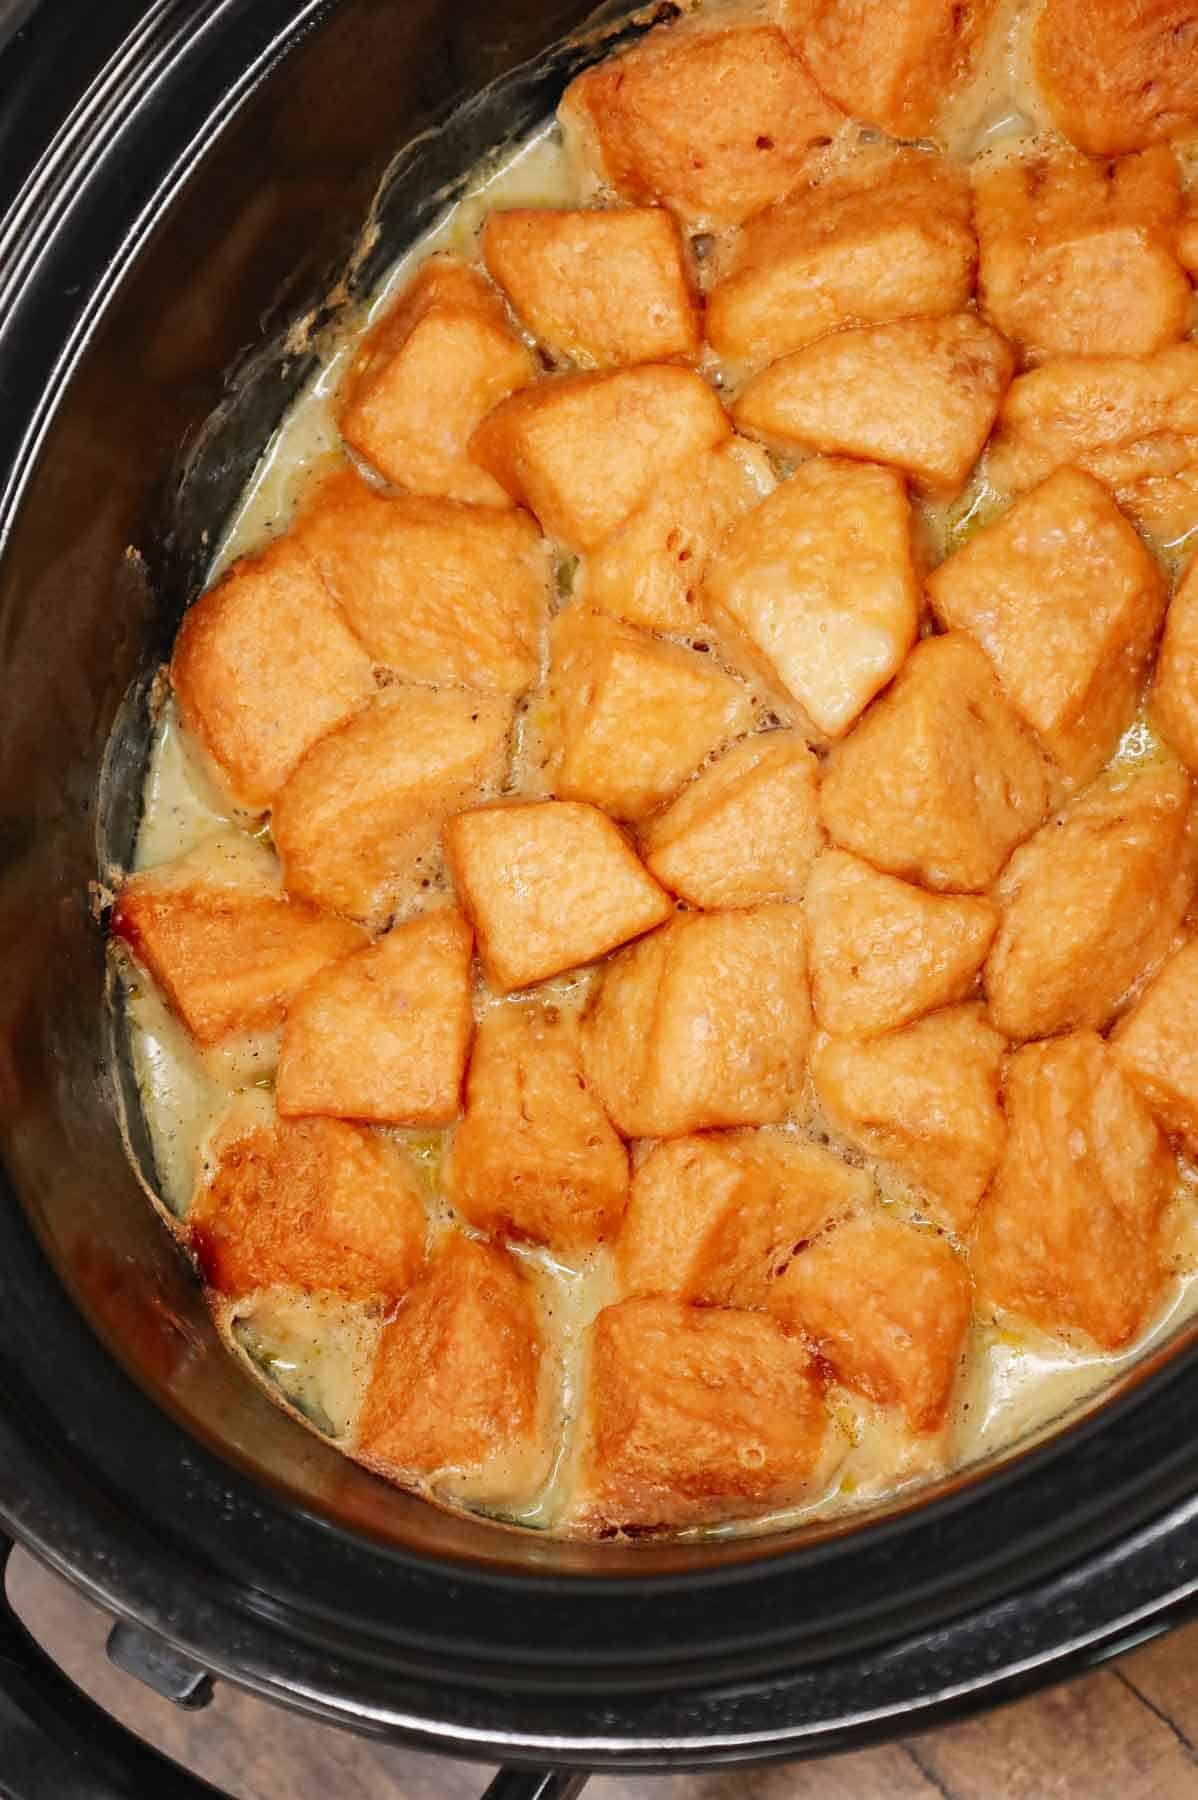 Crock Pot Chicken and Biscuits is a delicious comfort food dish made with boneless skinless chicken thighs, diced onions, celery, red and green bell peppers, cream of mushroom soup, cream of chicken soup, poultry seasoning and Pillsbury refrigerated biscuits.